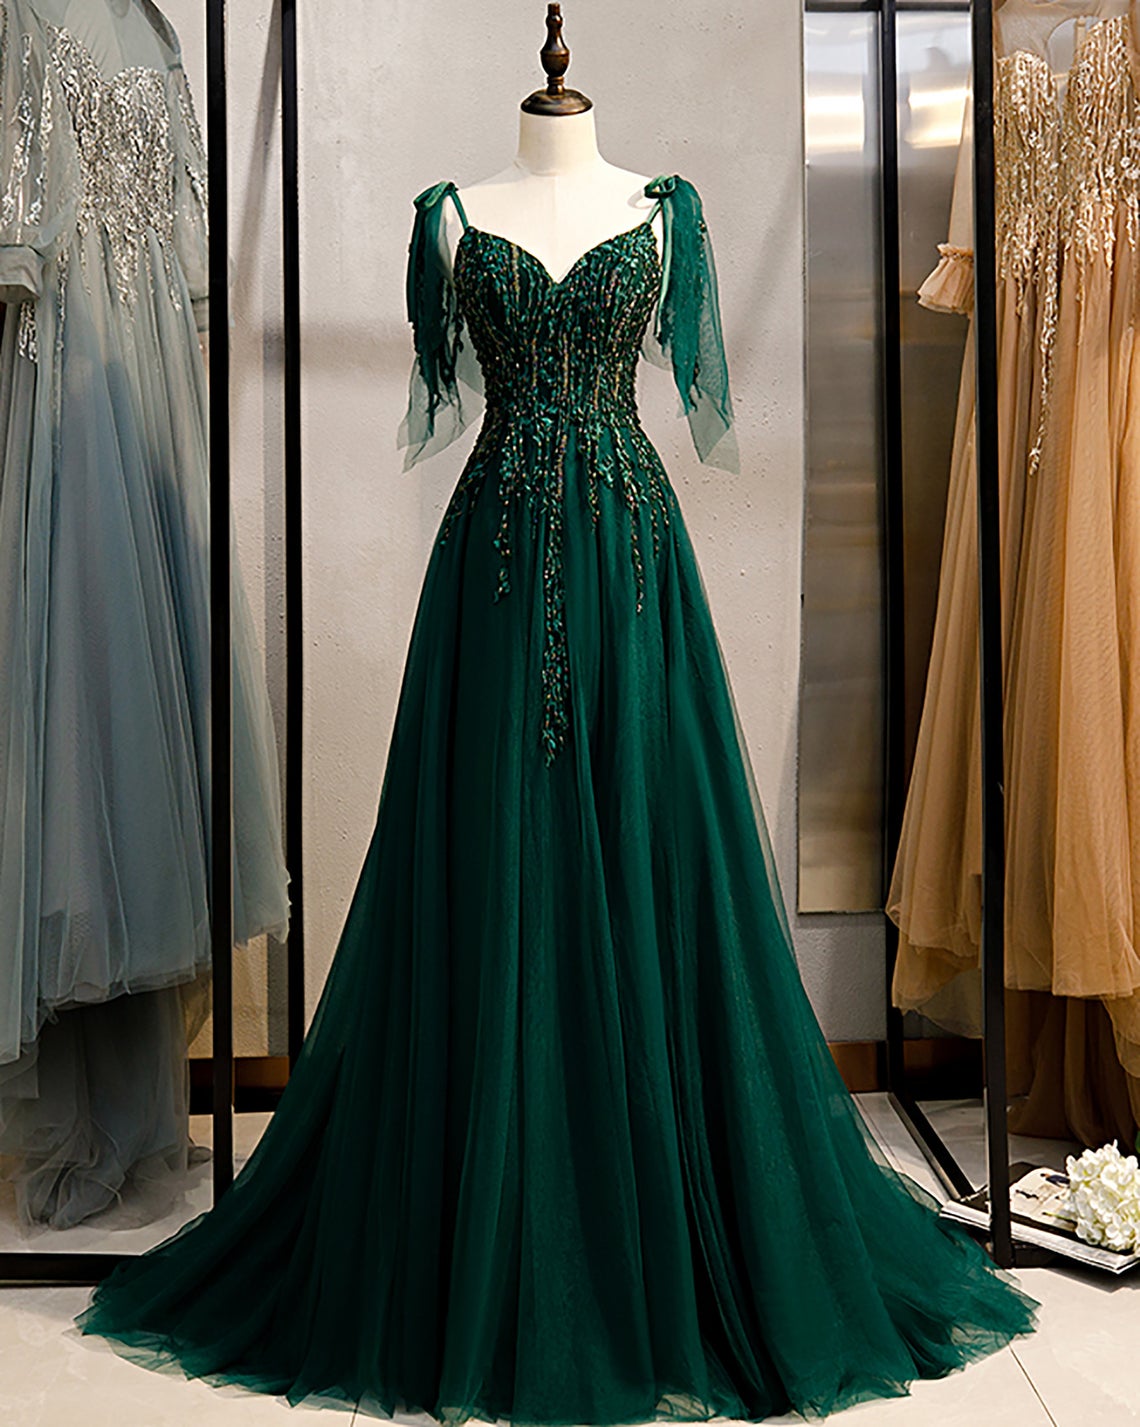 Emerald Green Velvet Dress Long Party Formal Evening Maxi Dress Cocktail  Gown Long Sleeved Maternity on Luulla